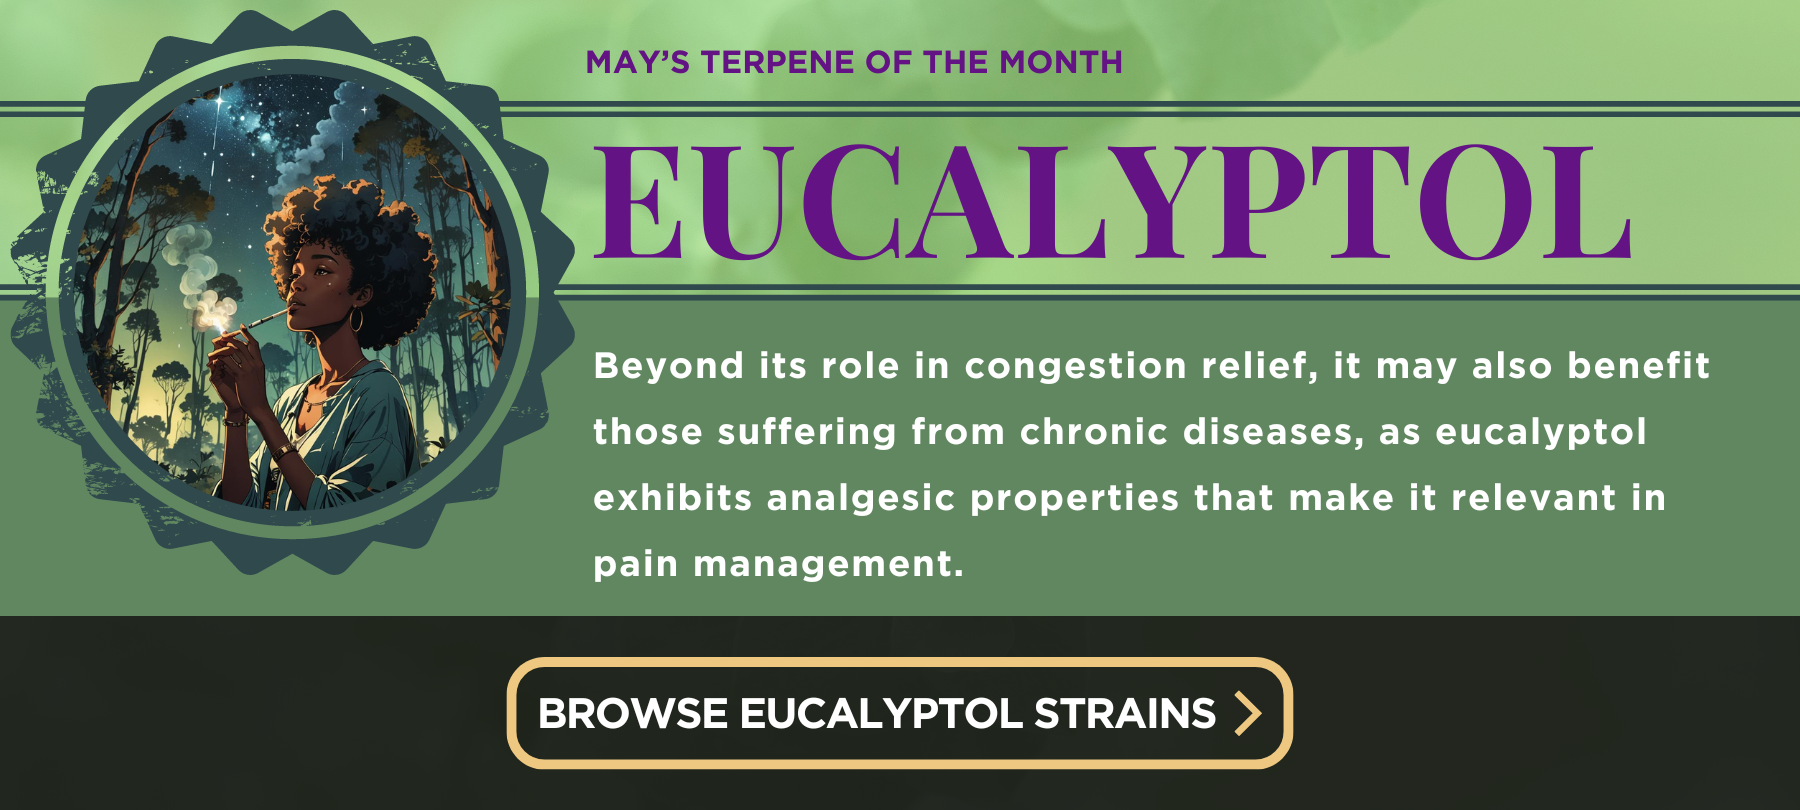 May's Terpene of the Month is Eucalyptol. Tap to browse strains.